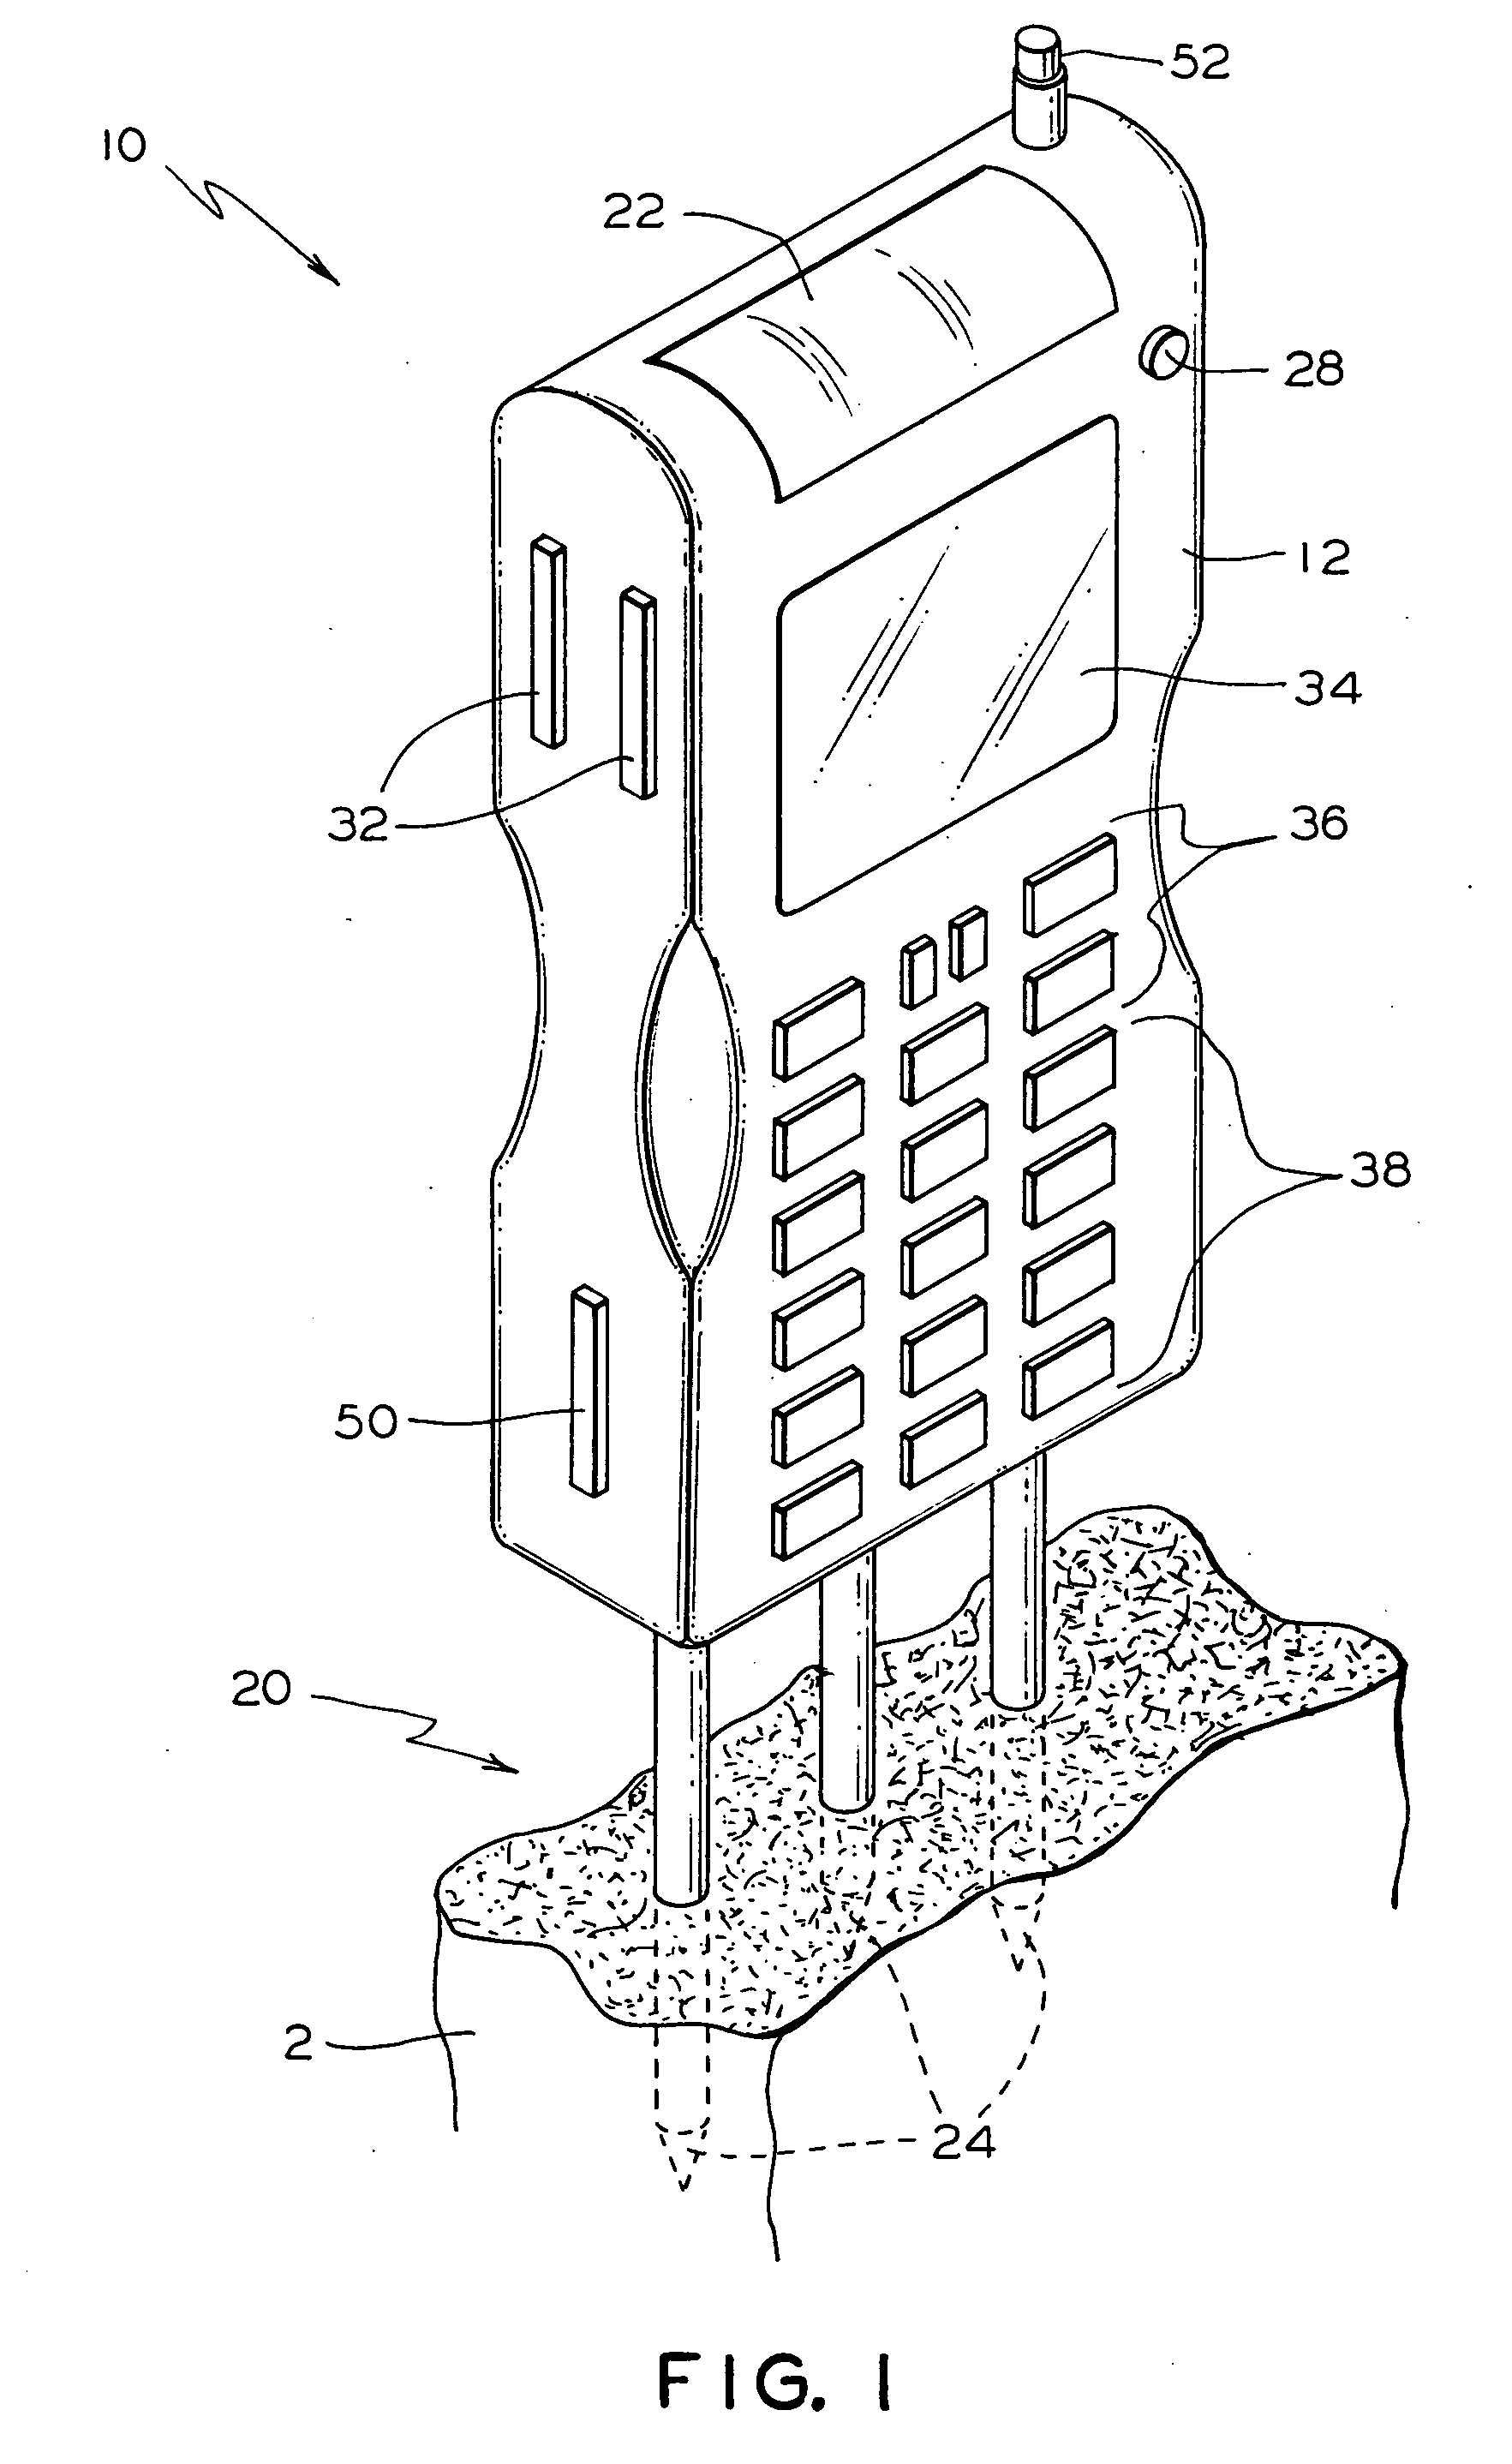 Apparatus and method for selecting and growing living plants